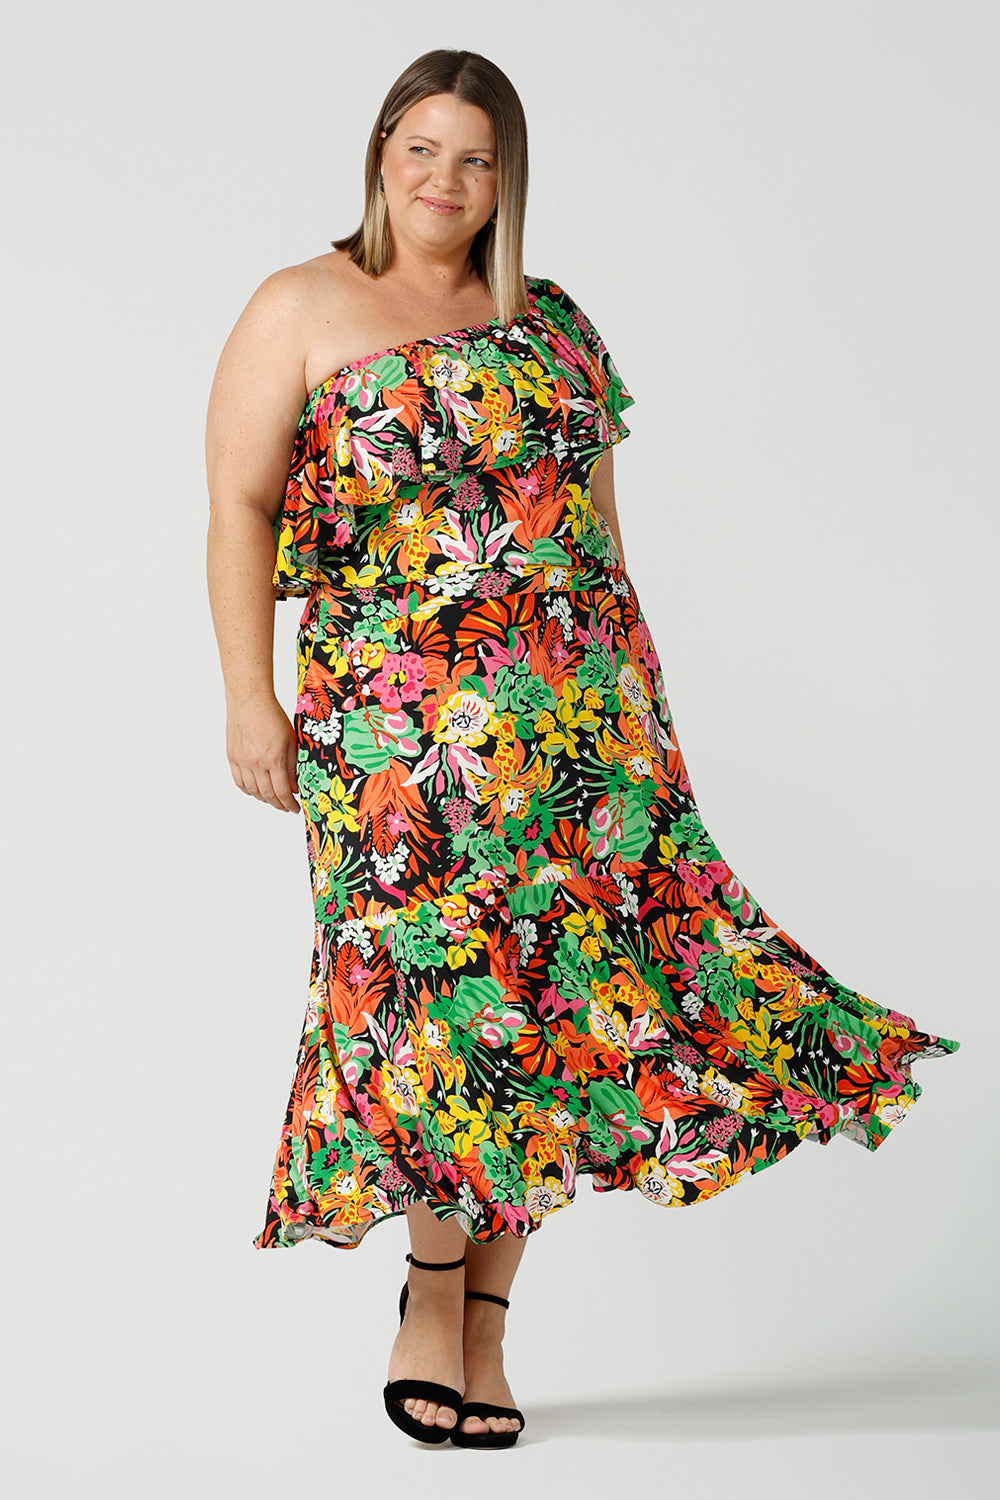 Plus size curvy woman wears colourful tiered skirt with off shoulder top. Beautiful Cancun print in multi-colour soft jersey. The perfect statement outfit for the summer season. Designed and made in Australia sizes 8-24.